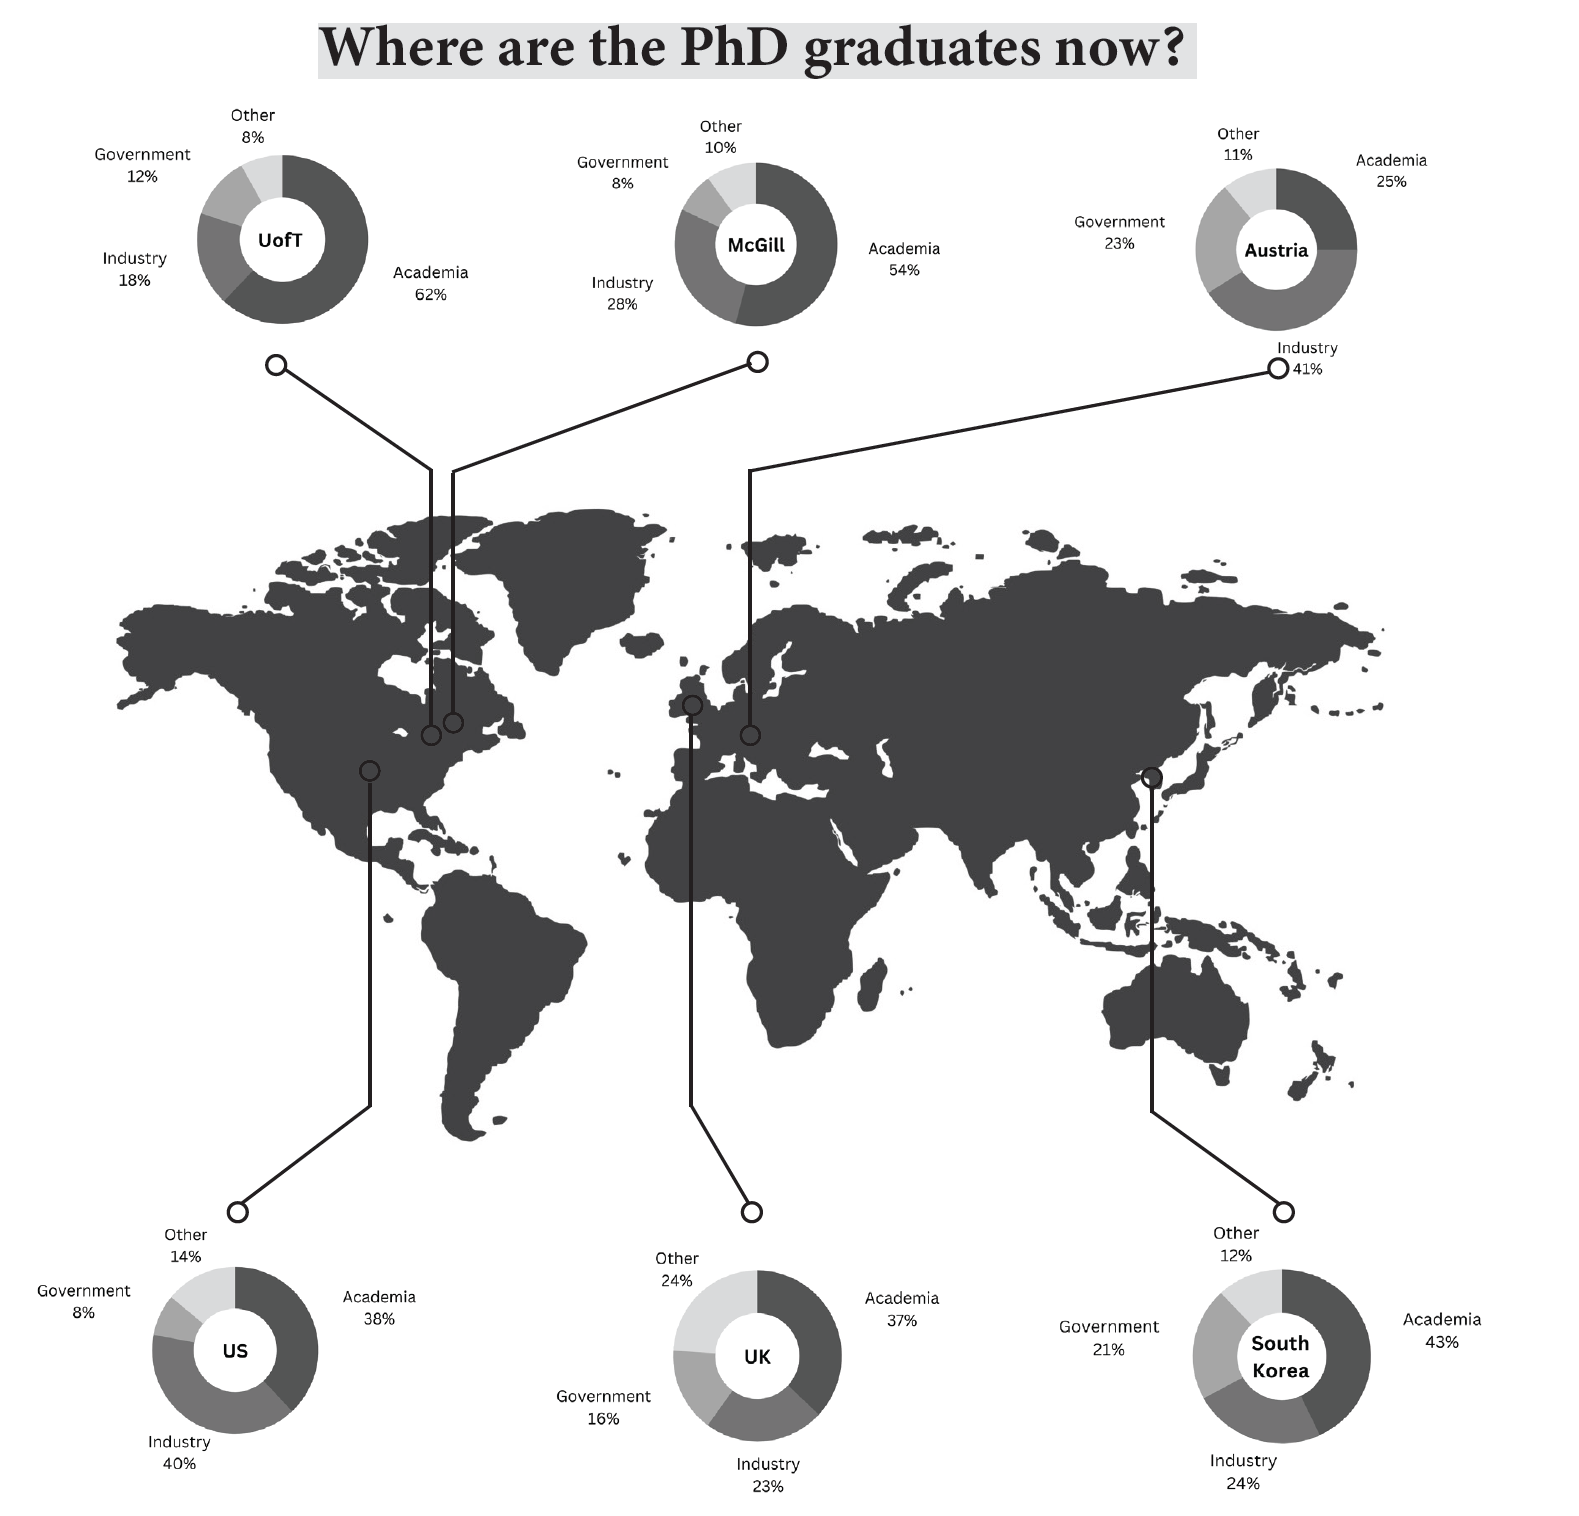 Government – The Road Less Traveled: Why Some PhD Graduates Choose Public Sector Careers